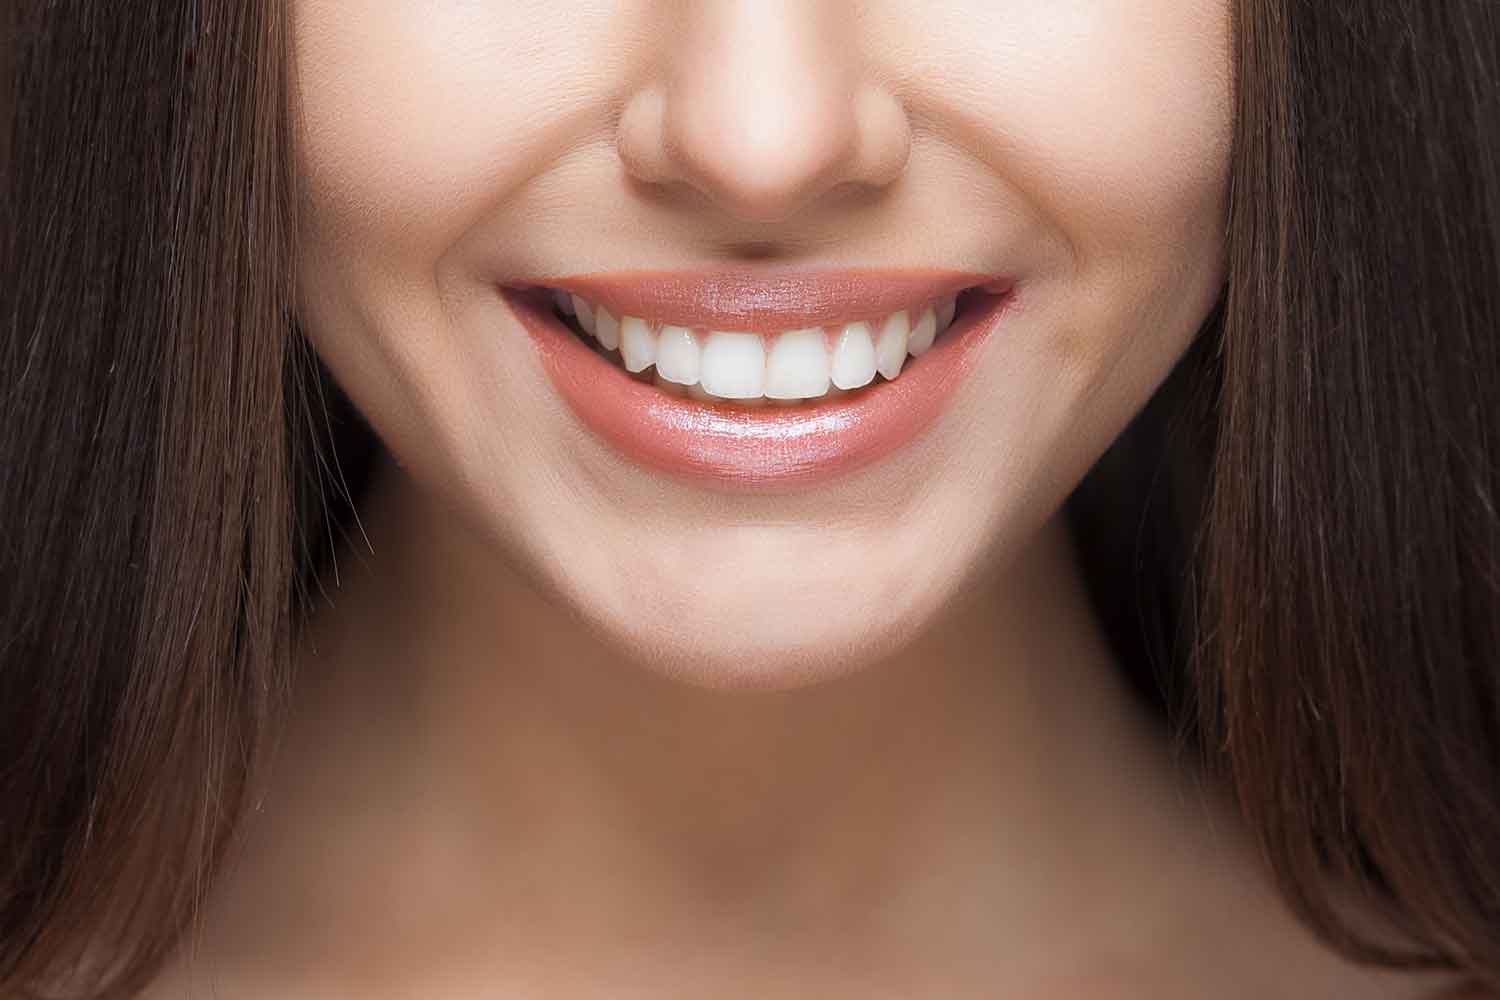 How to deal with toxic mercury fillings and prevent receding gums